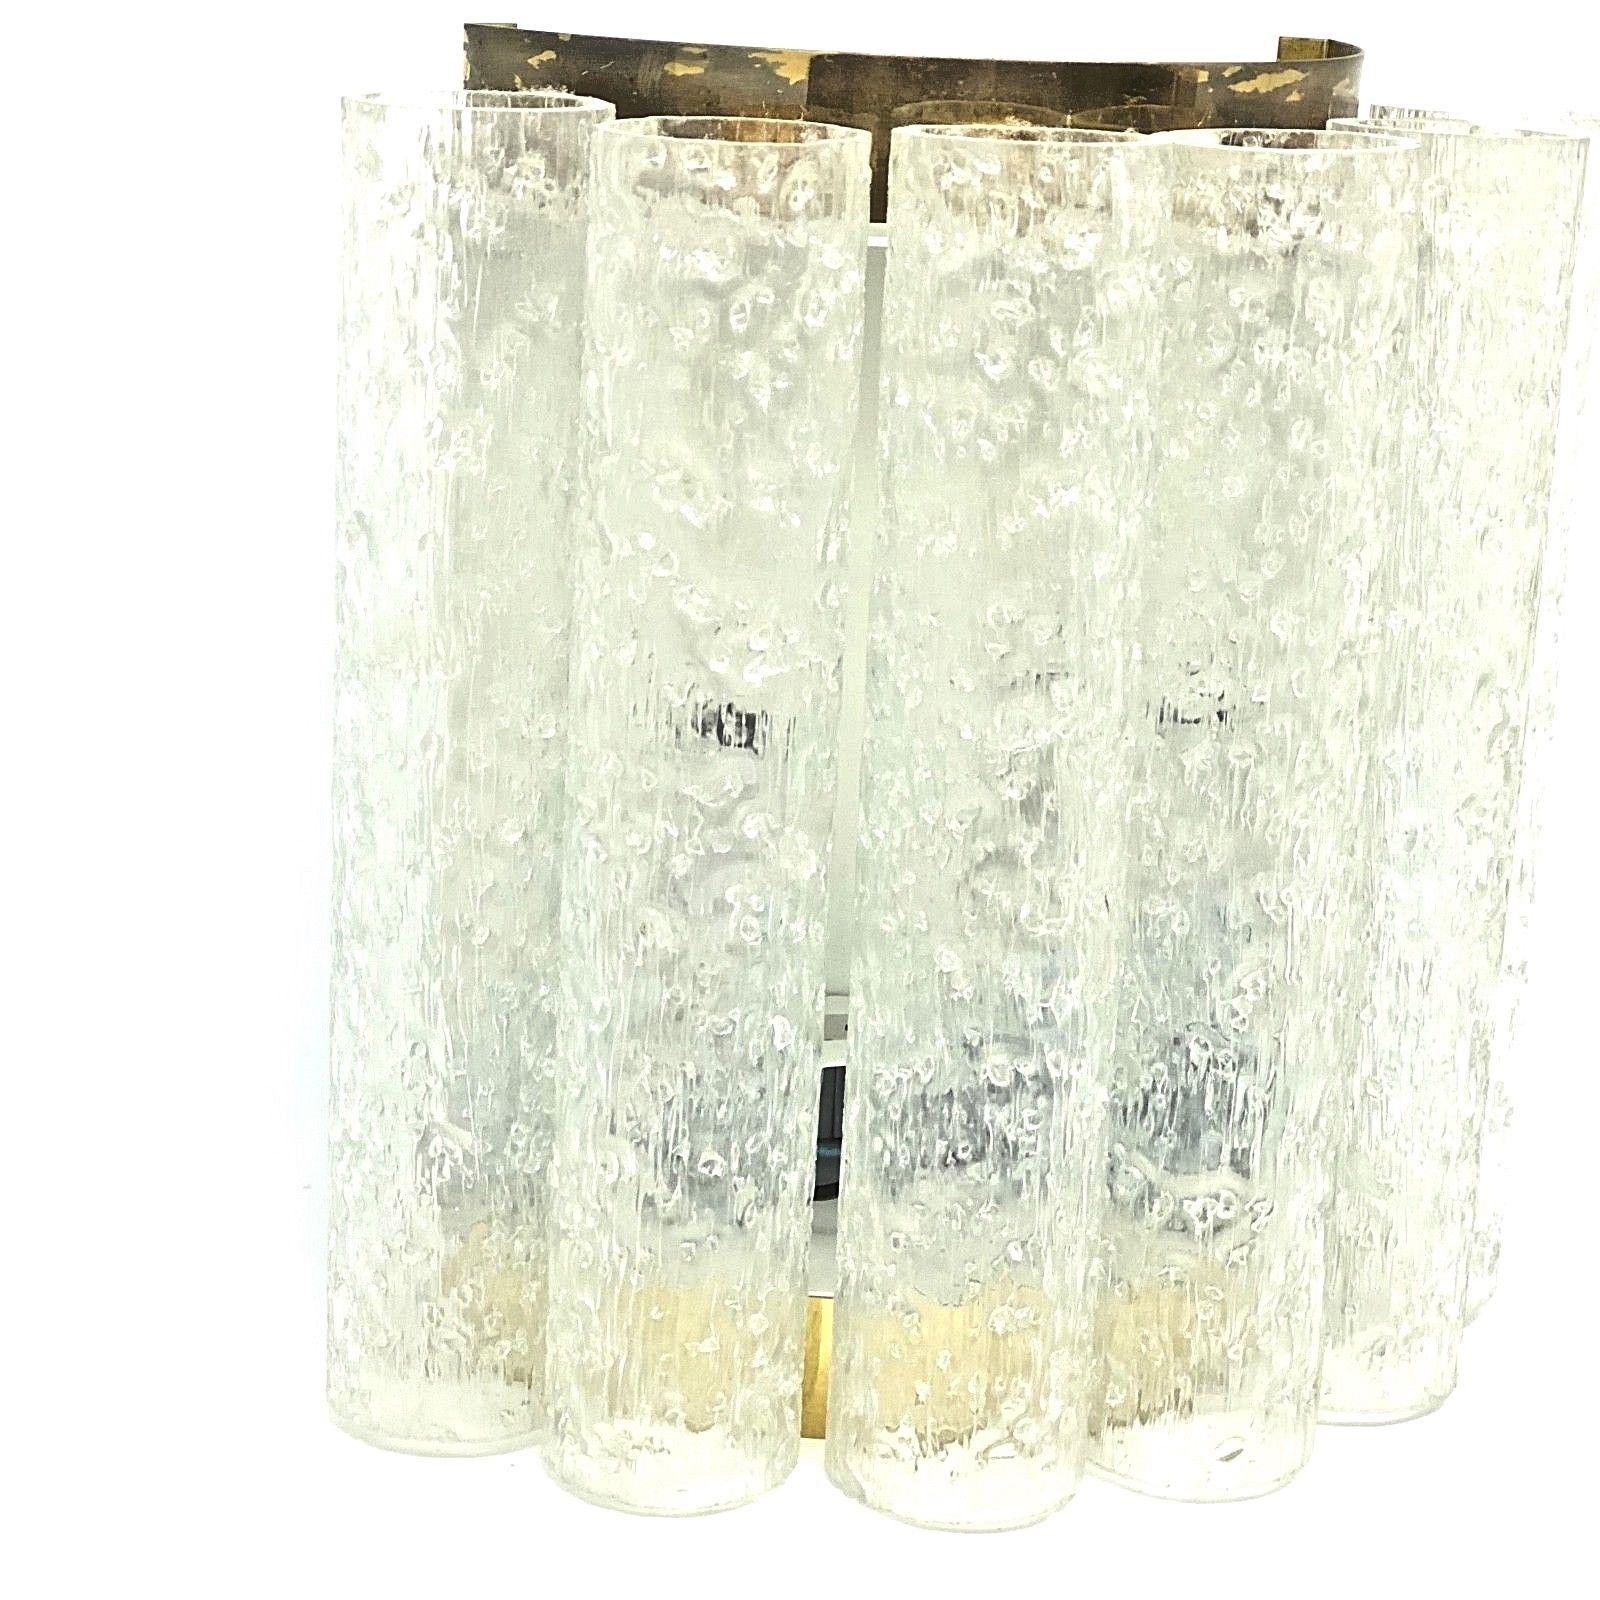 Elegant chic glass tube sconce by Doria Leuchten, Germany. The Fixture requires two European E14 candelabra bulbs, each bulb up to 40 watts. Brass parts with patina, but this is old-age.